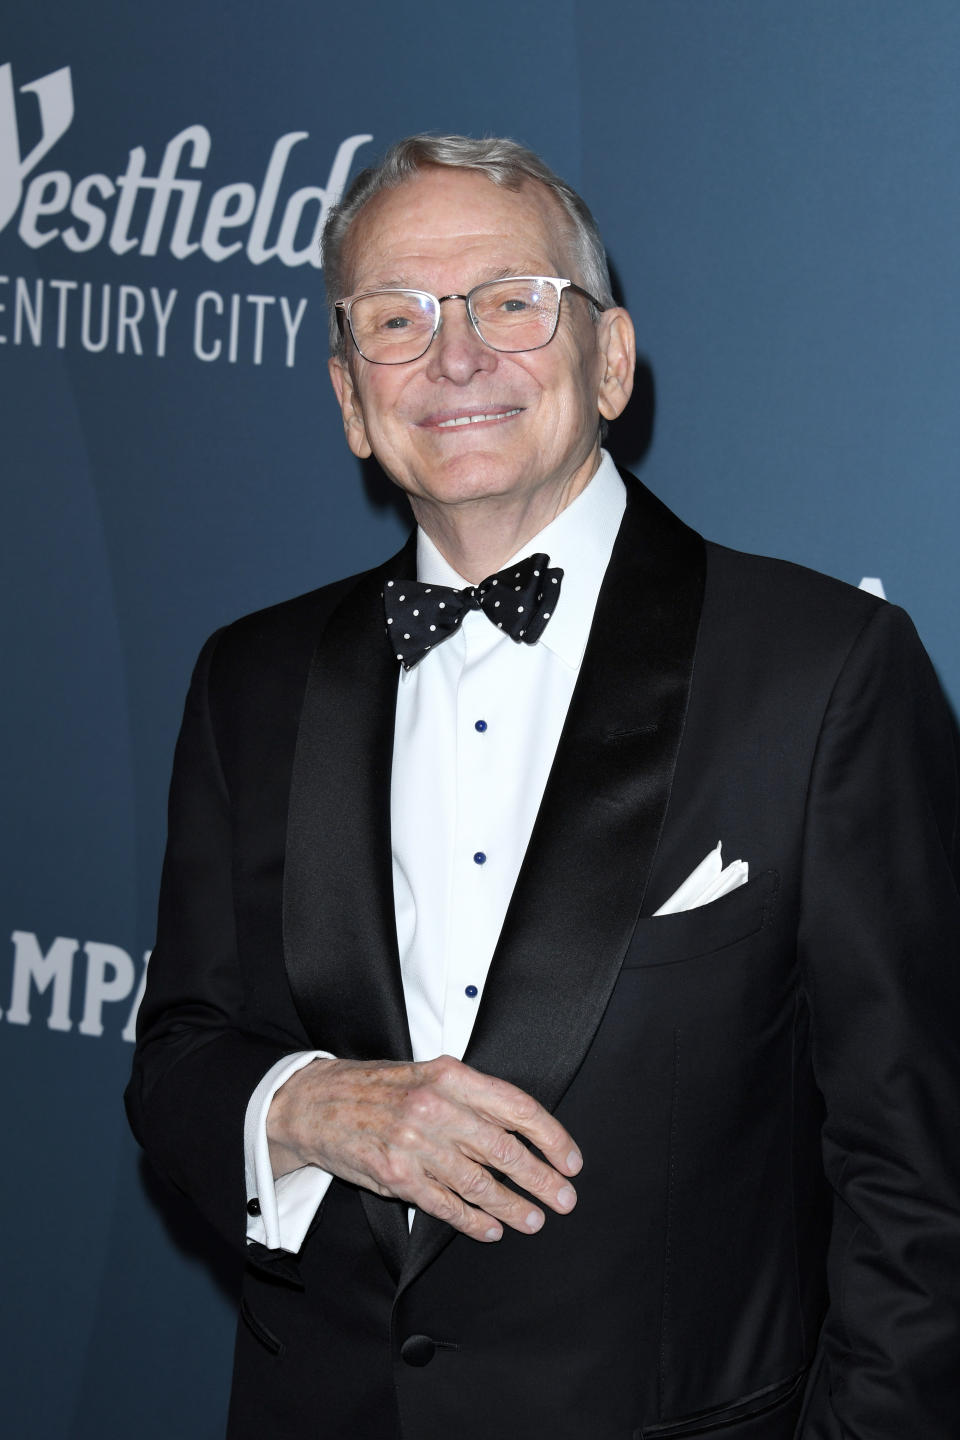 BEVERLY HILLS, CALIFORNIA - JANUARY 28: Bob Mackie attends the 22nd CDGA (Costume Designers Guild Awards) at The Beverly Hilton Hotel on January 28, 2020 in Beverly Hills, California. (Photo by Jon Kopaloff/WireImage,)